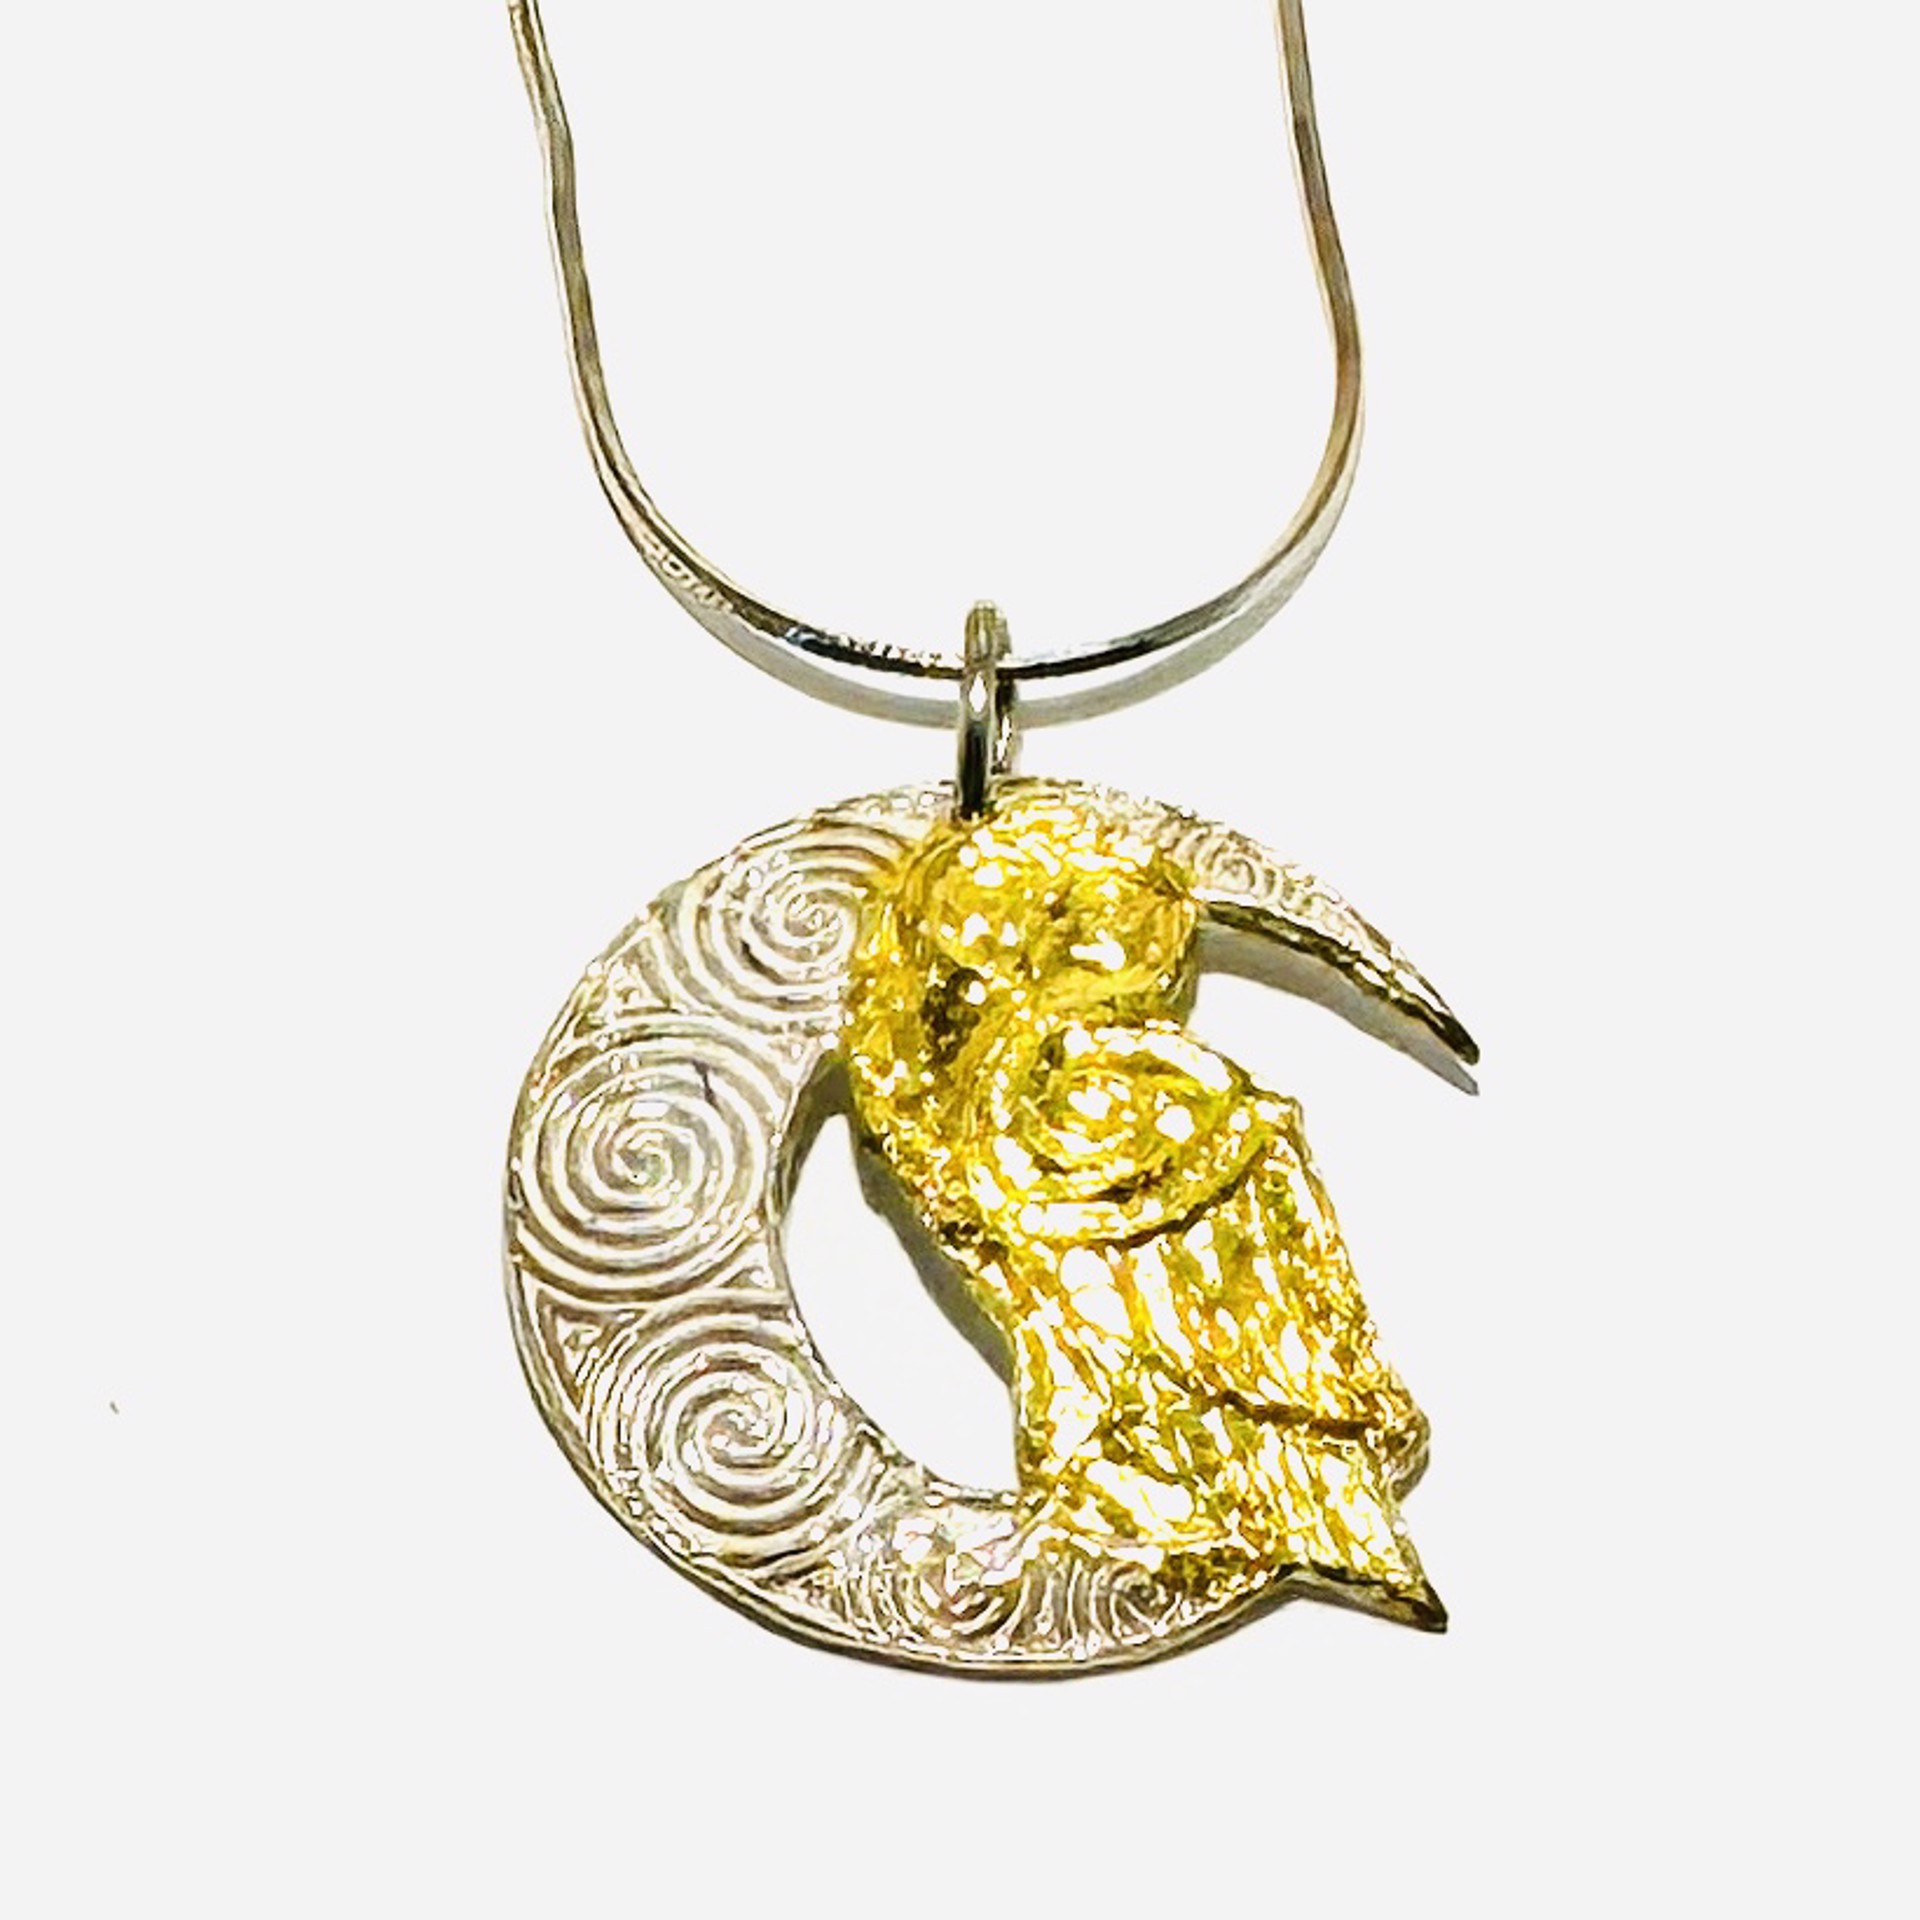 Keum-boo Fine Silver and Gold Owl and Moon Necklace KH23-26 by Karen Hakim